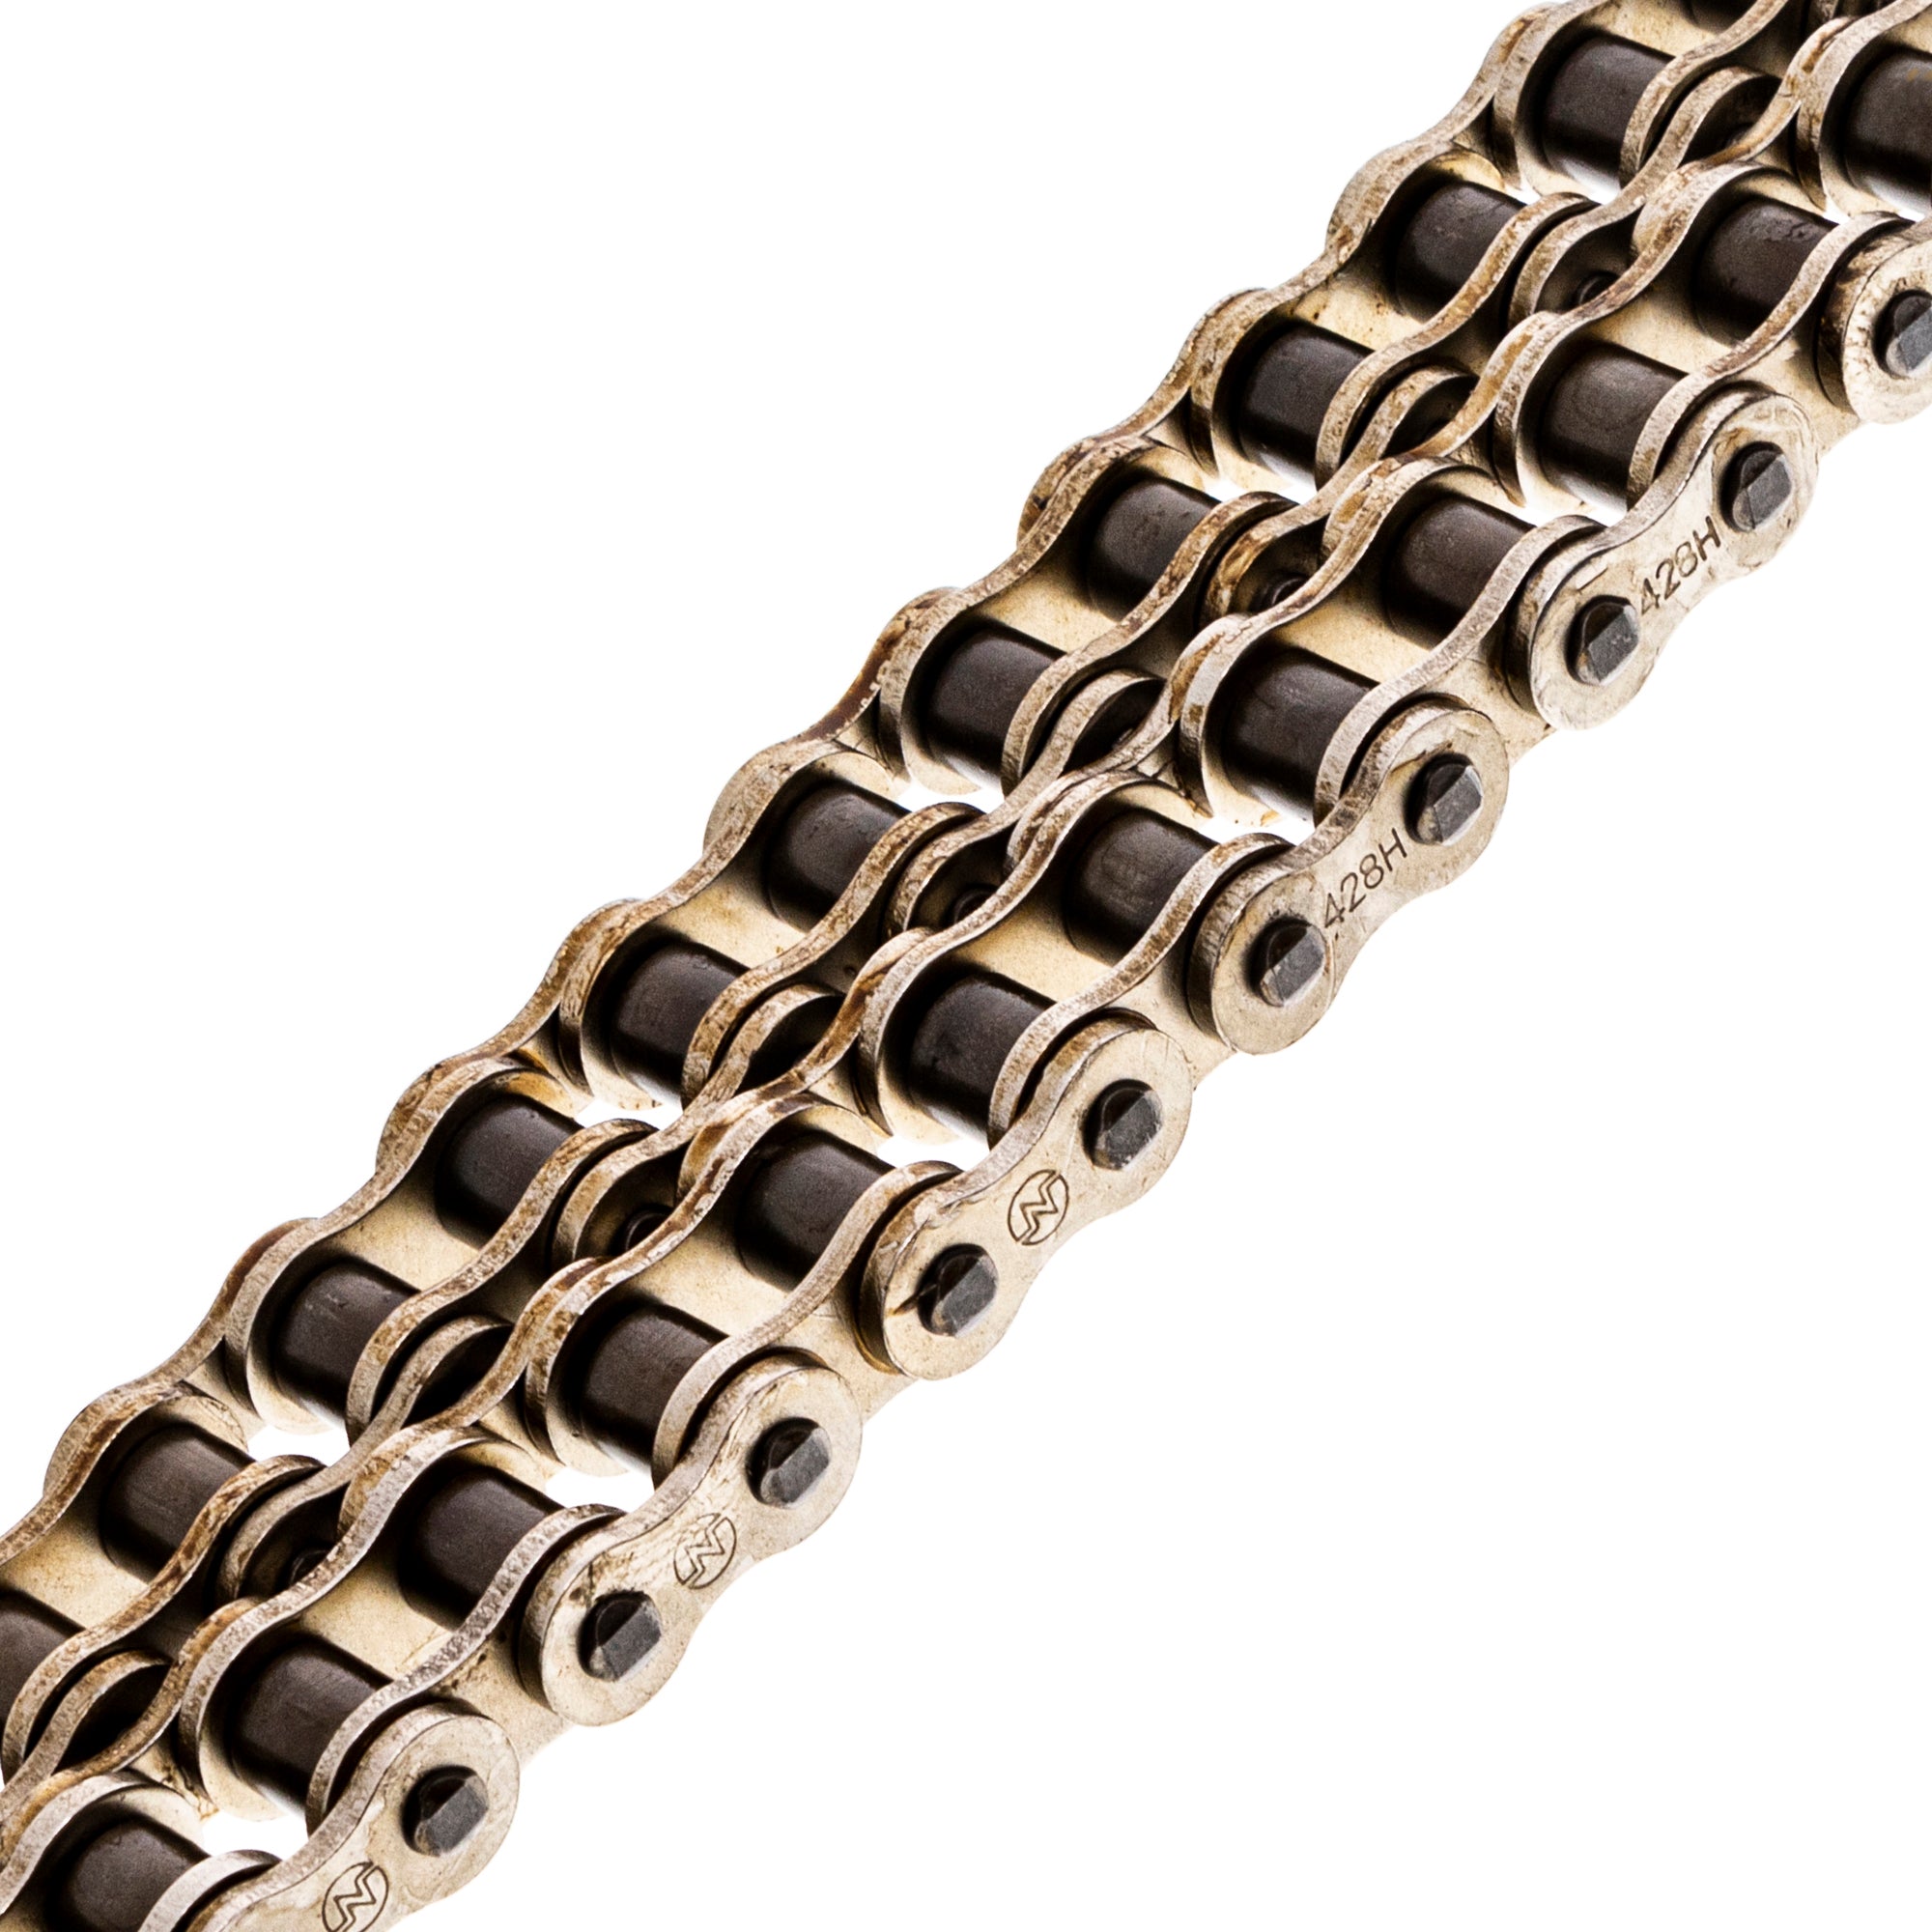 Drive Chain 124 Standard Non O-Ring w/ Master Link for zOTHER MTD Cub Cadet Troy-Bilt YZ85 NICHE 519-CDC2244H